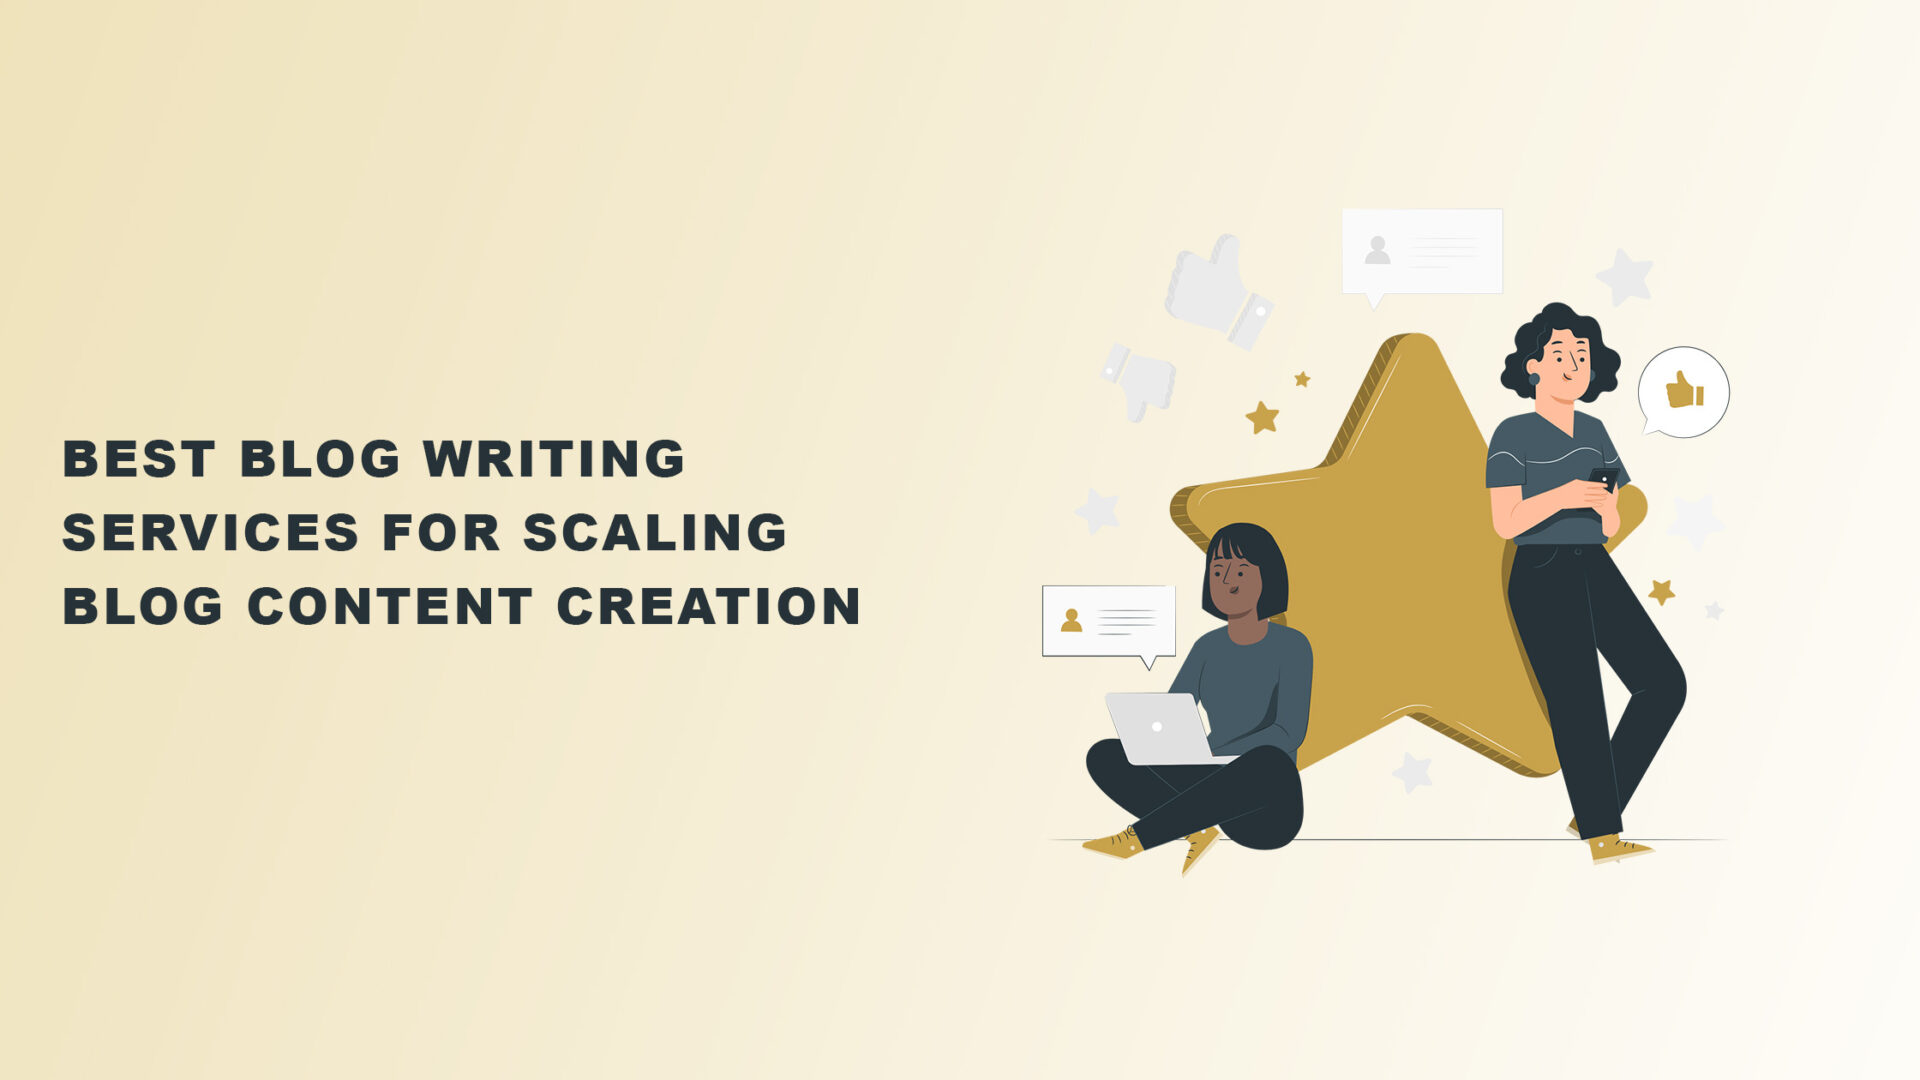 Best Blog Writing Services for Scaling Blog Content Creation